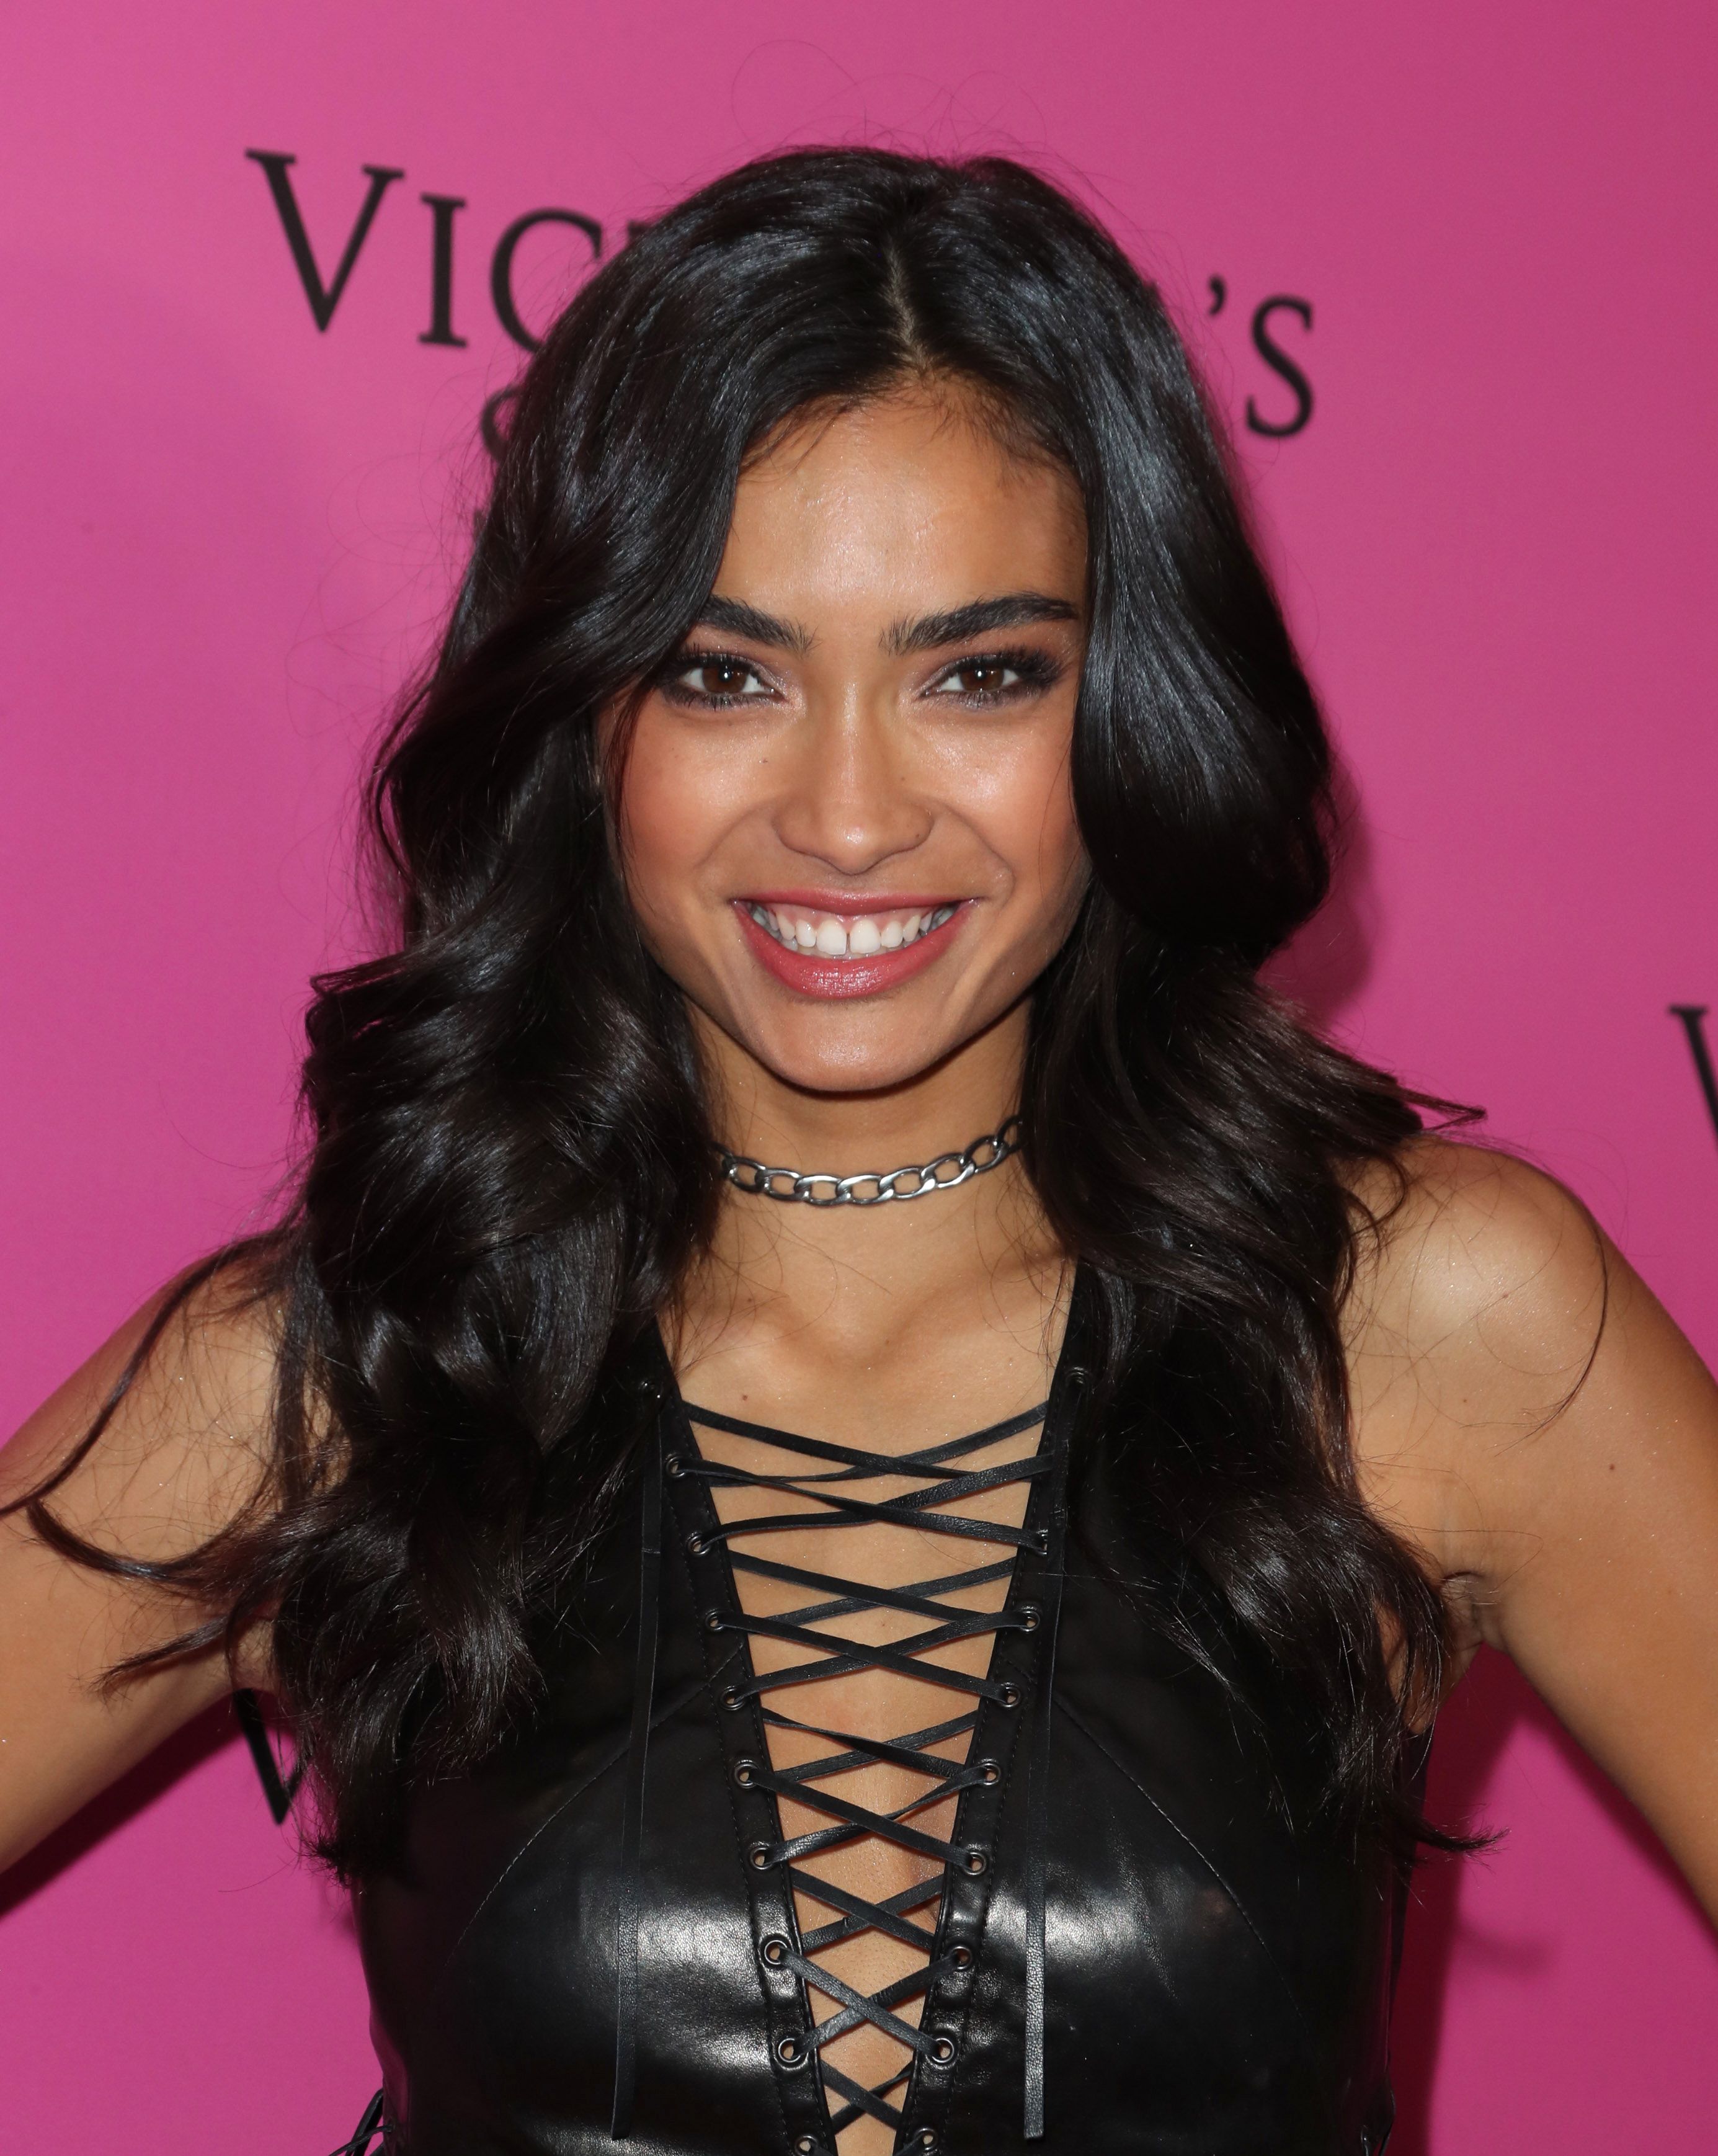 Kelly Gale attends 2017 Victoria’s Secret Fashion Show after party